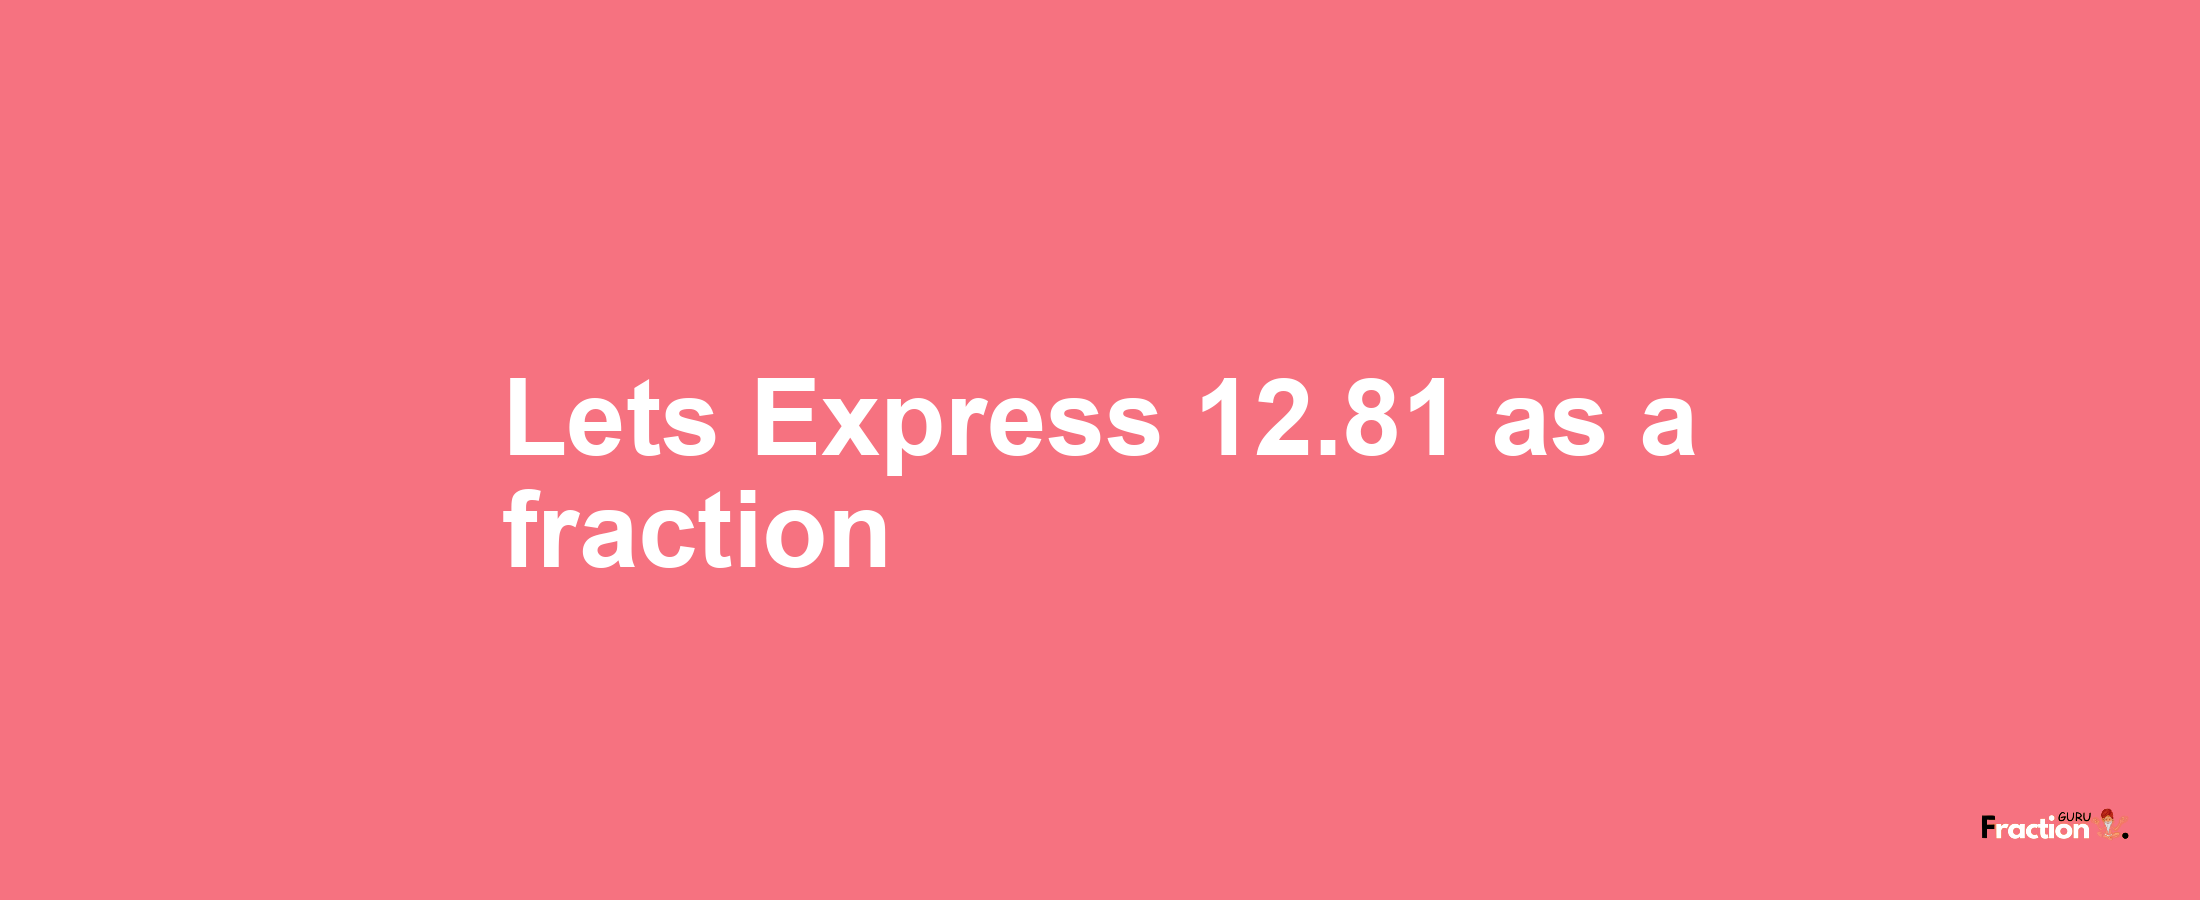 Lets Express 12.81 as afraction